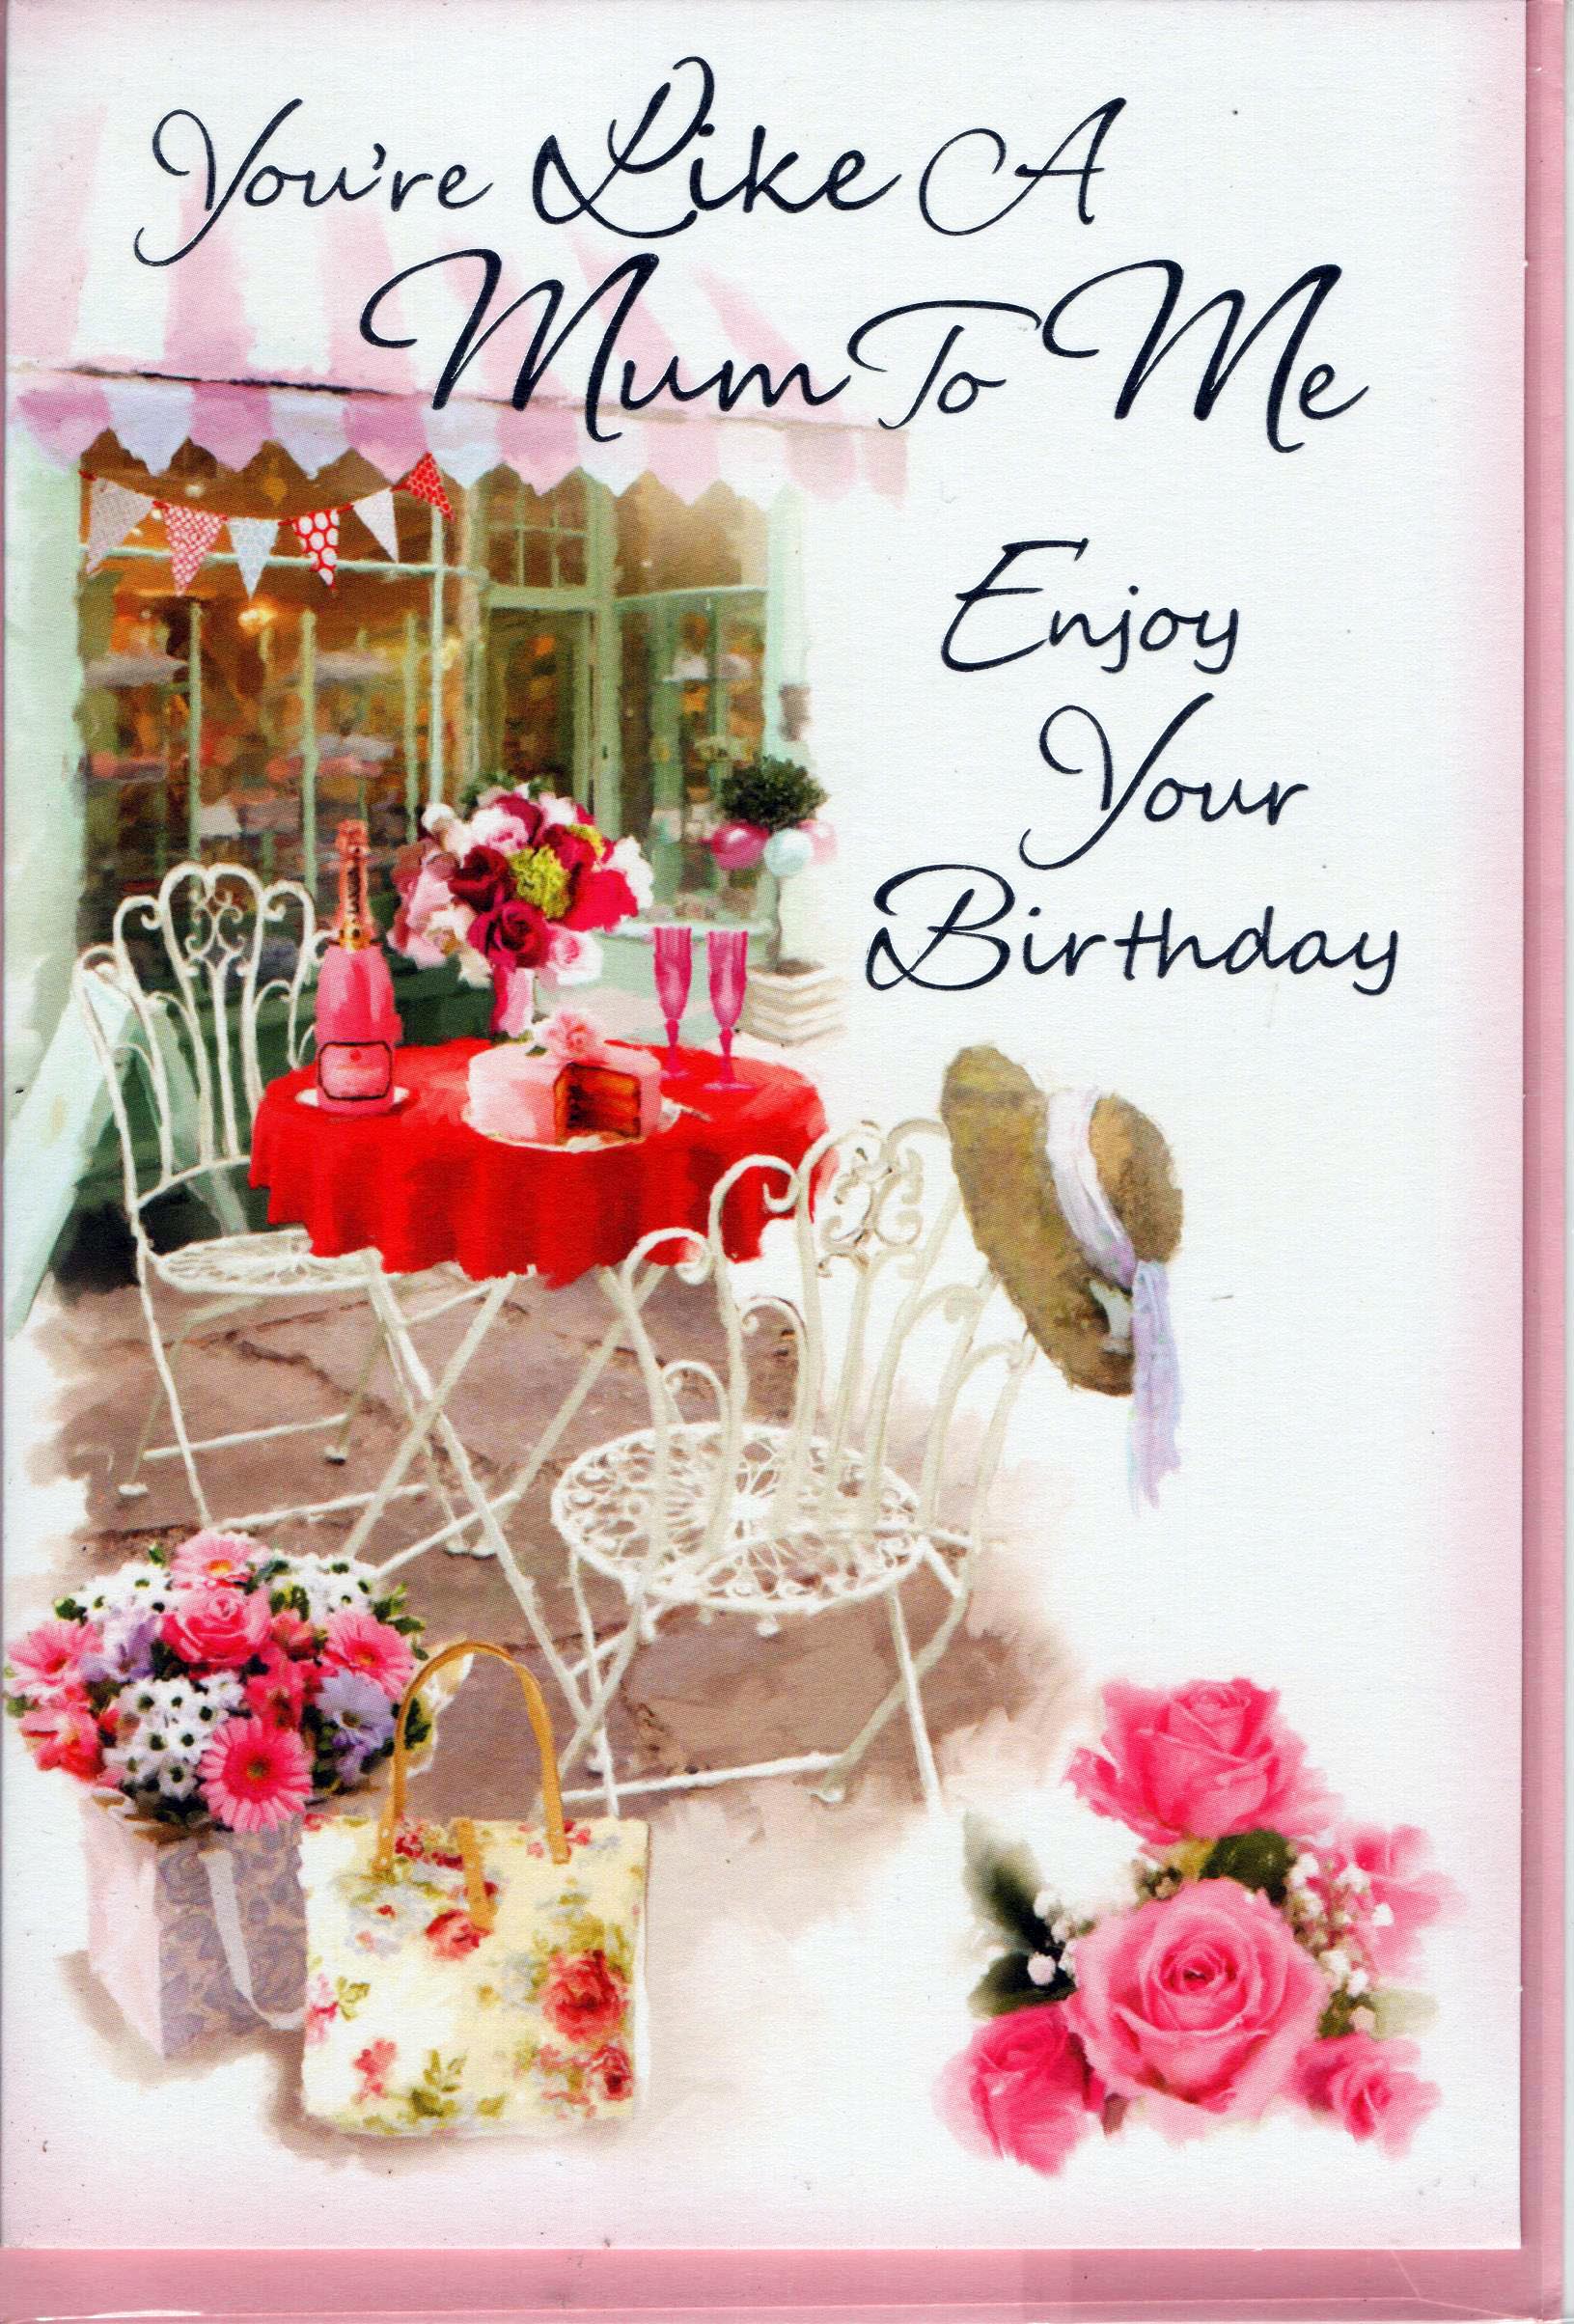 You're Like a Mum To Me Enjoy Your Birthday Greeting Card